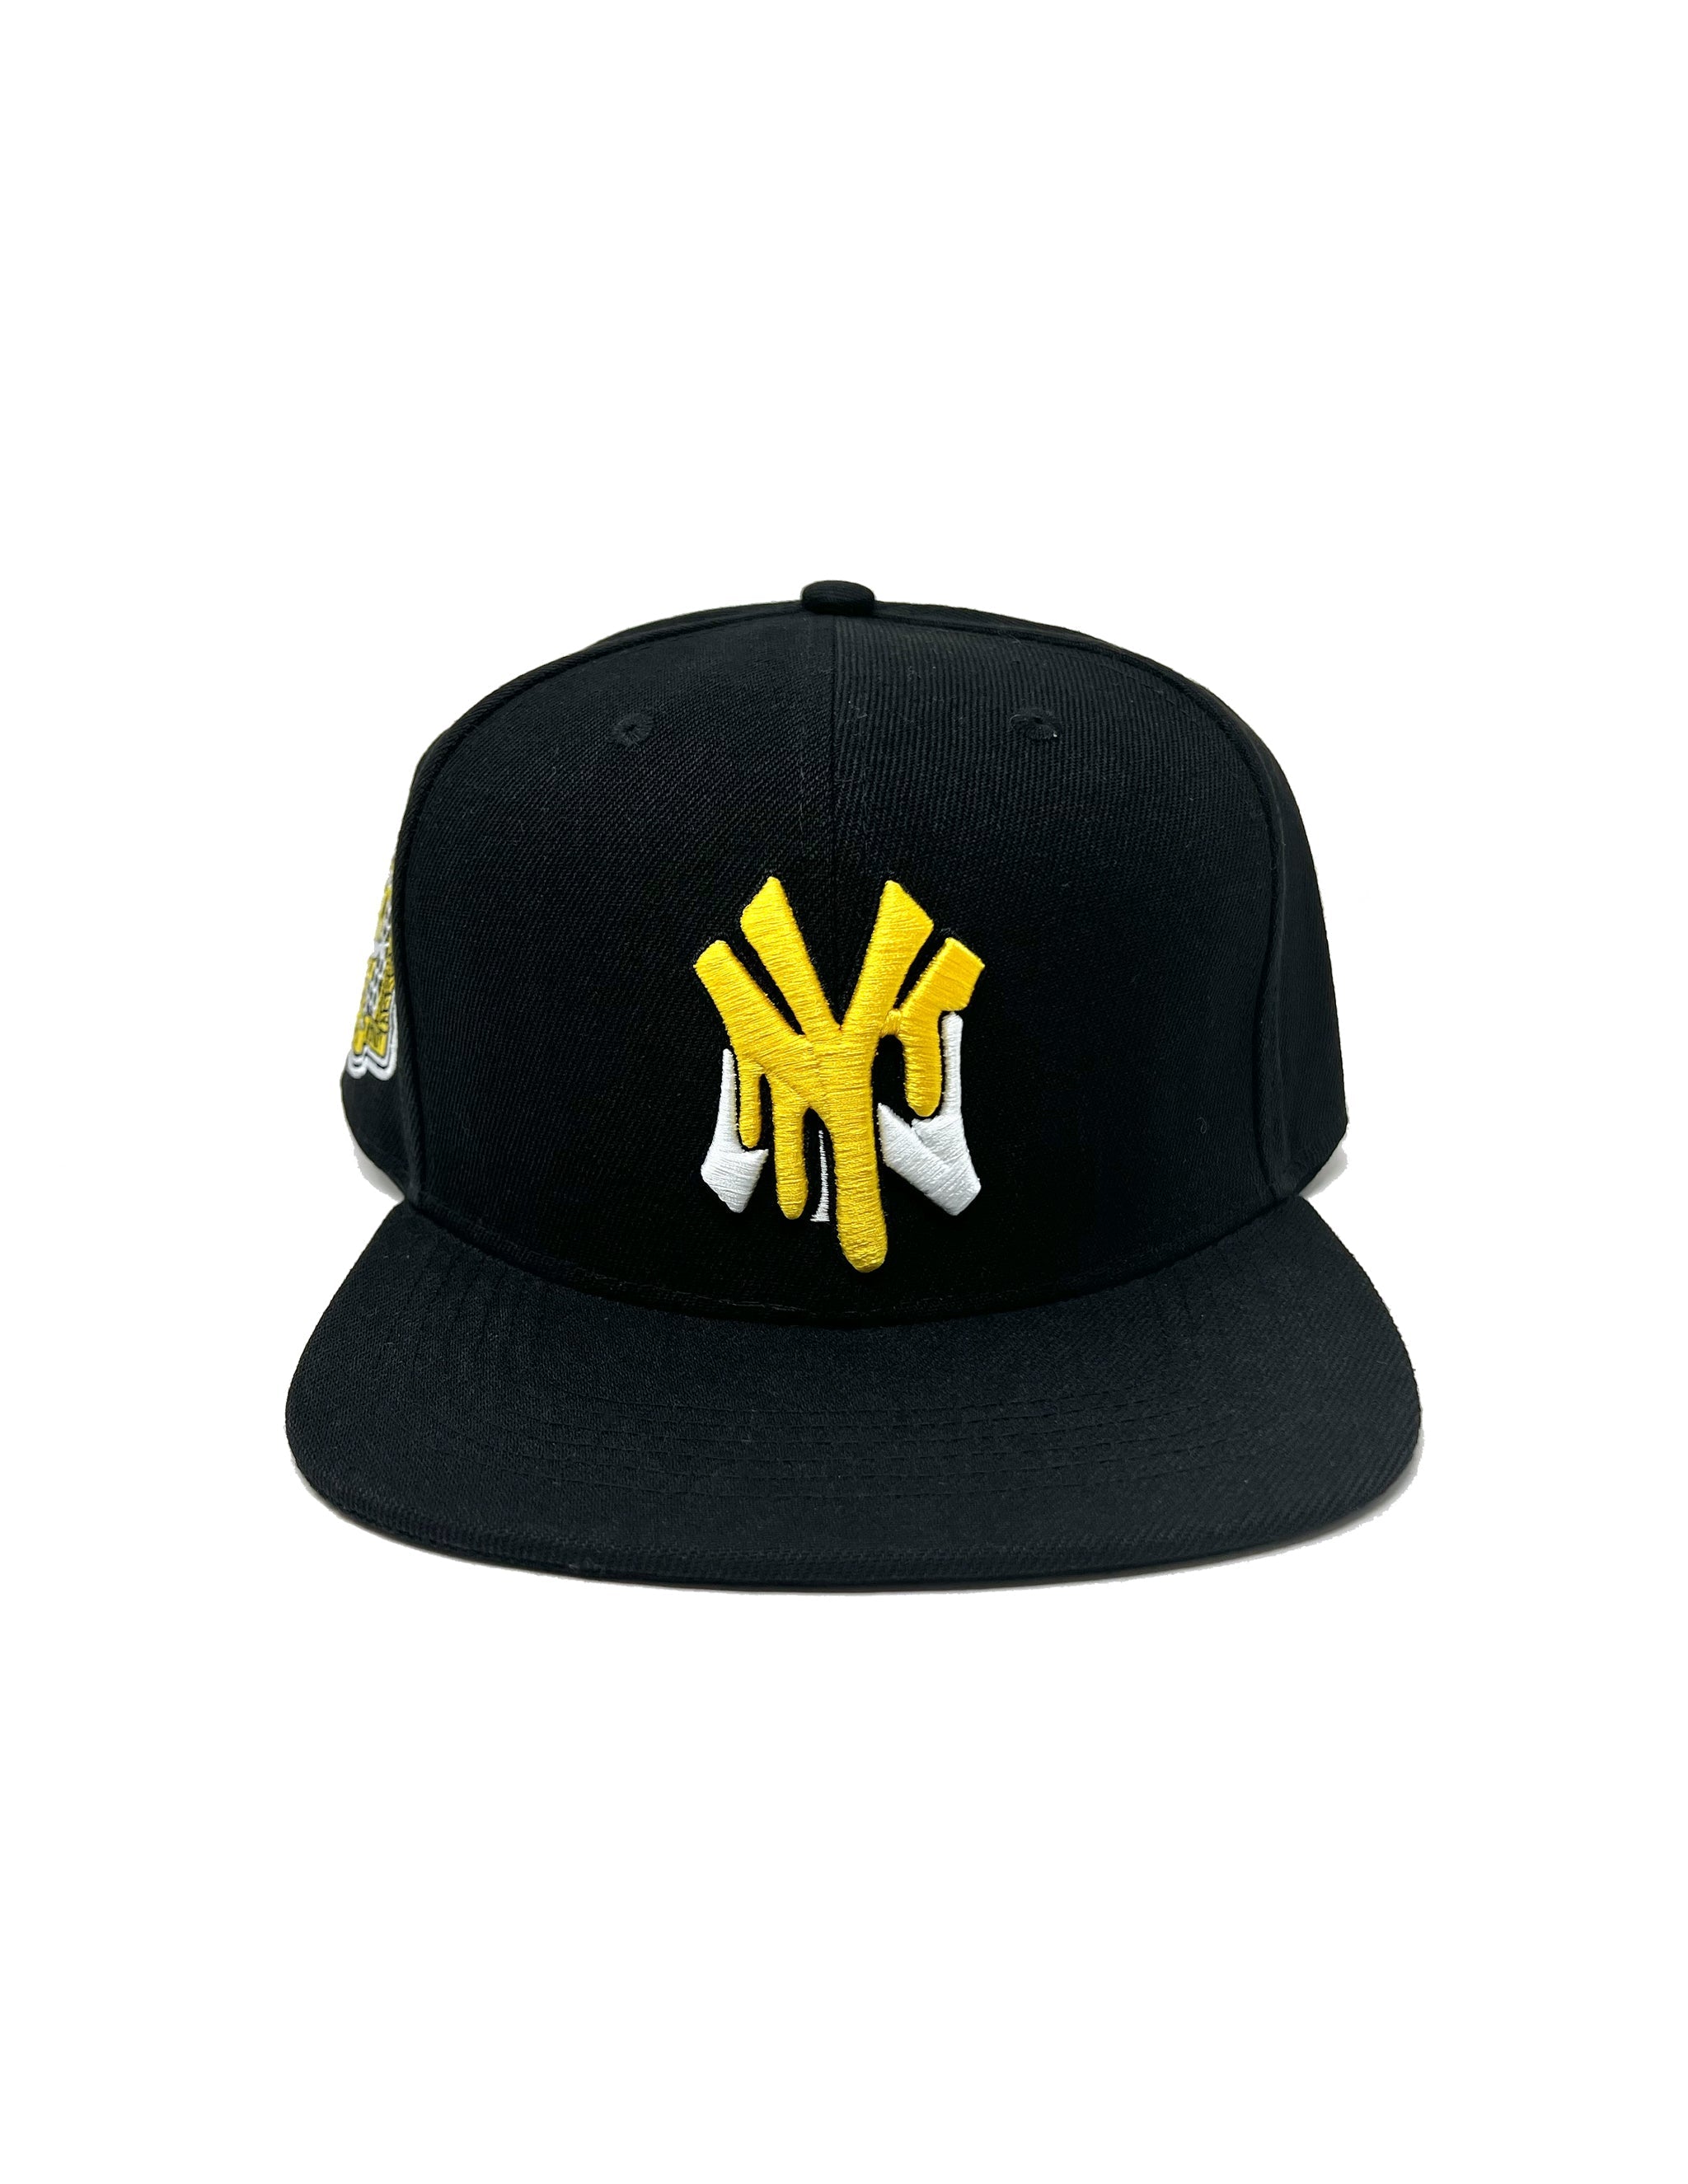 Cali Honey NYC Drip Fitted Hat